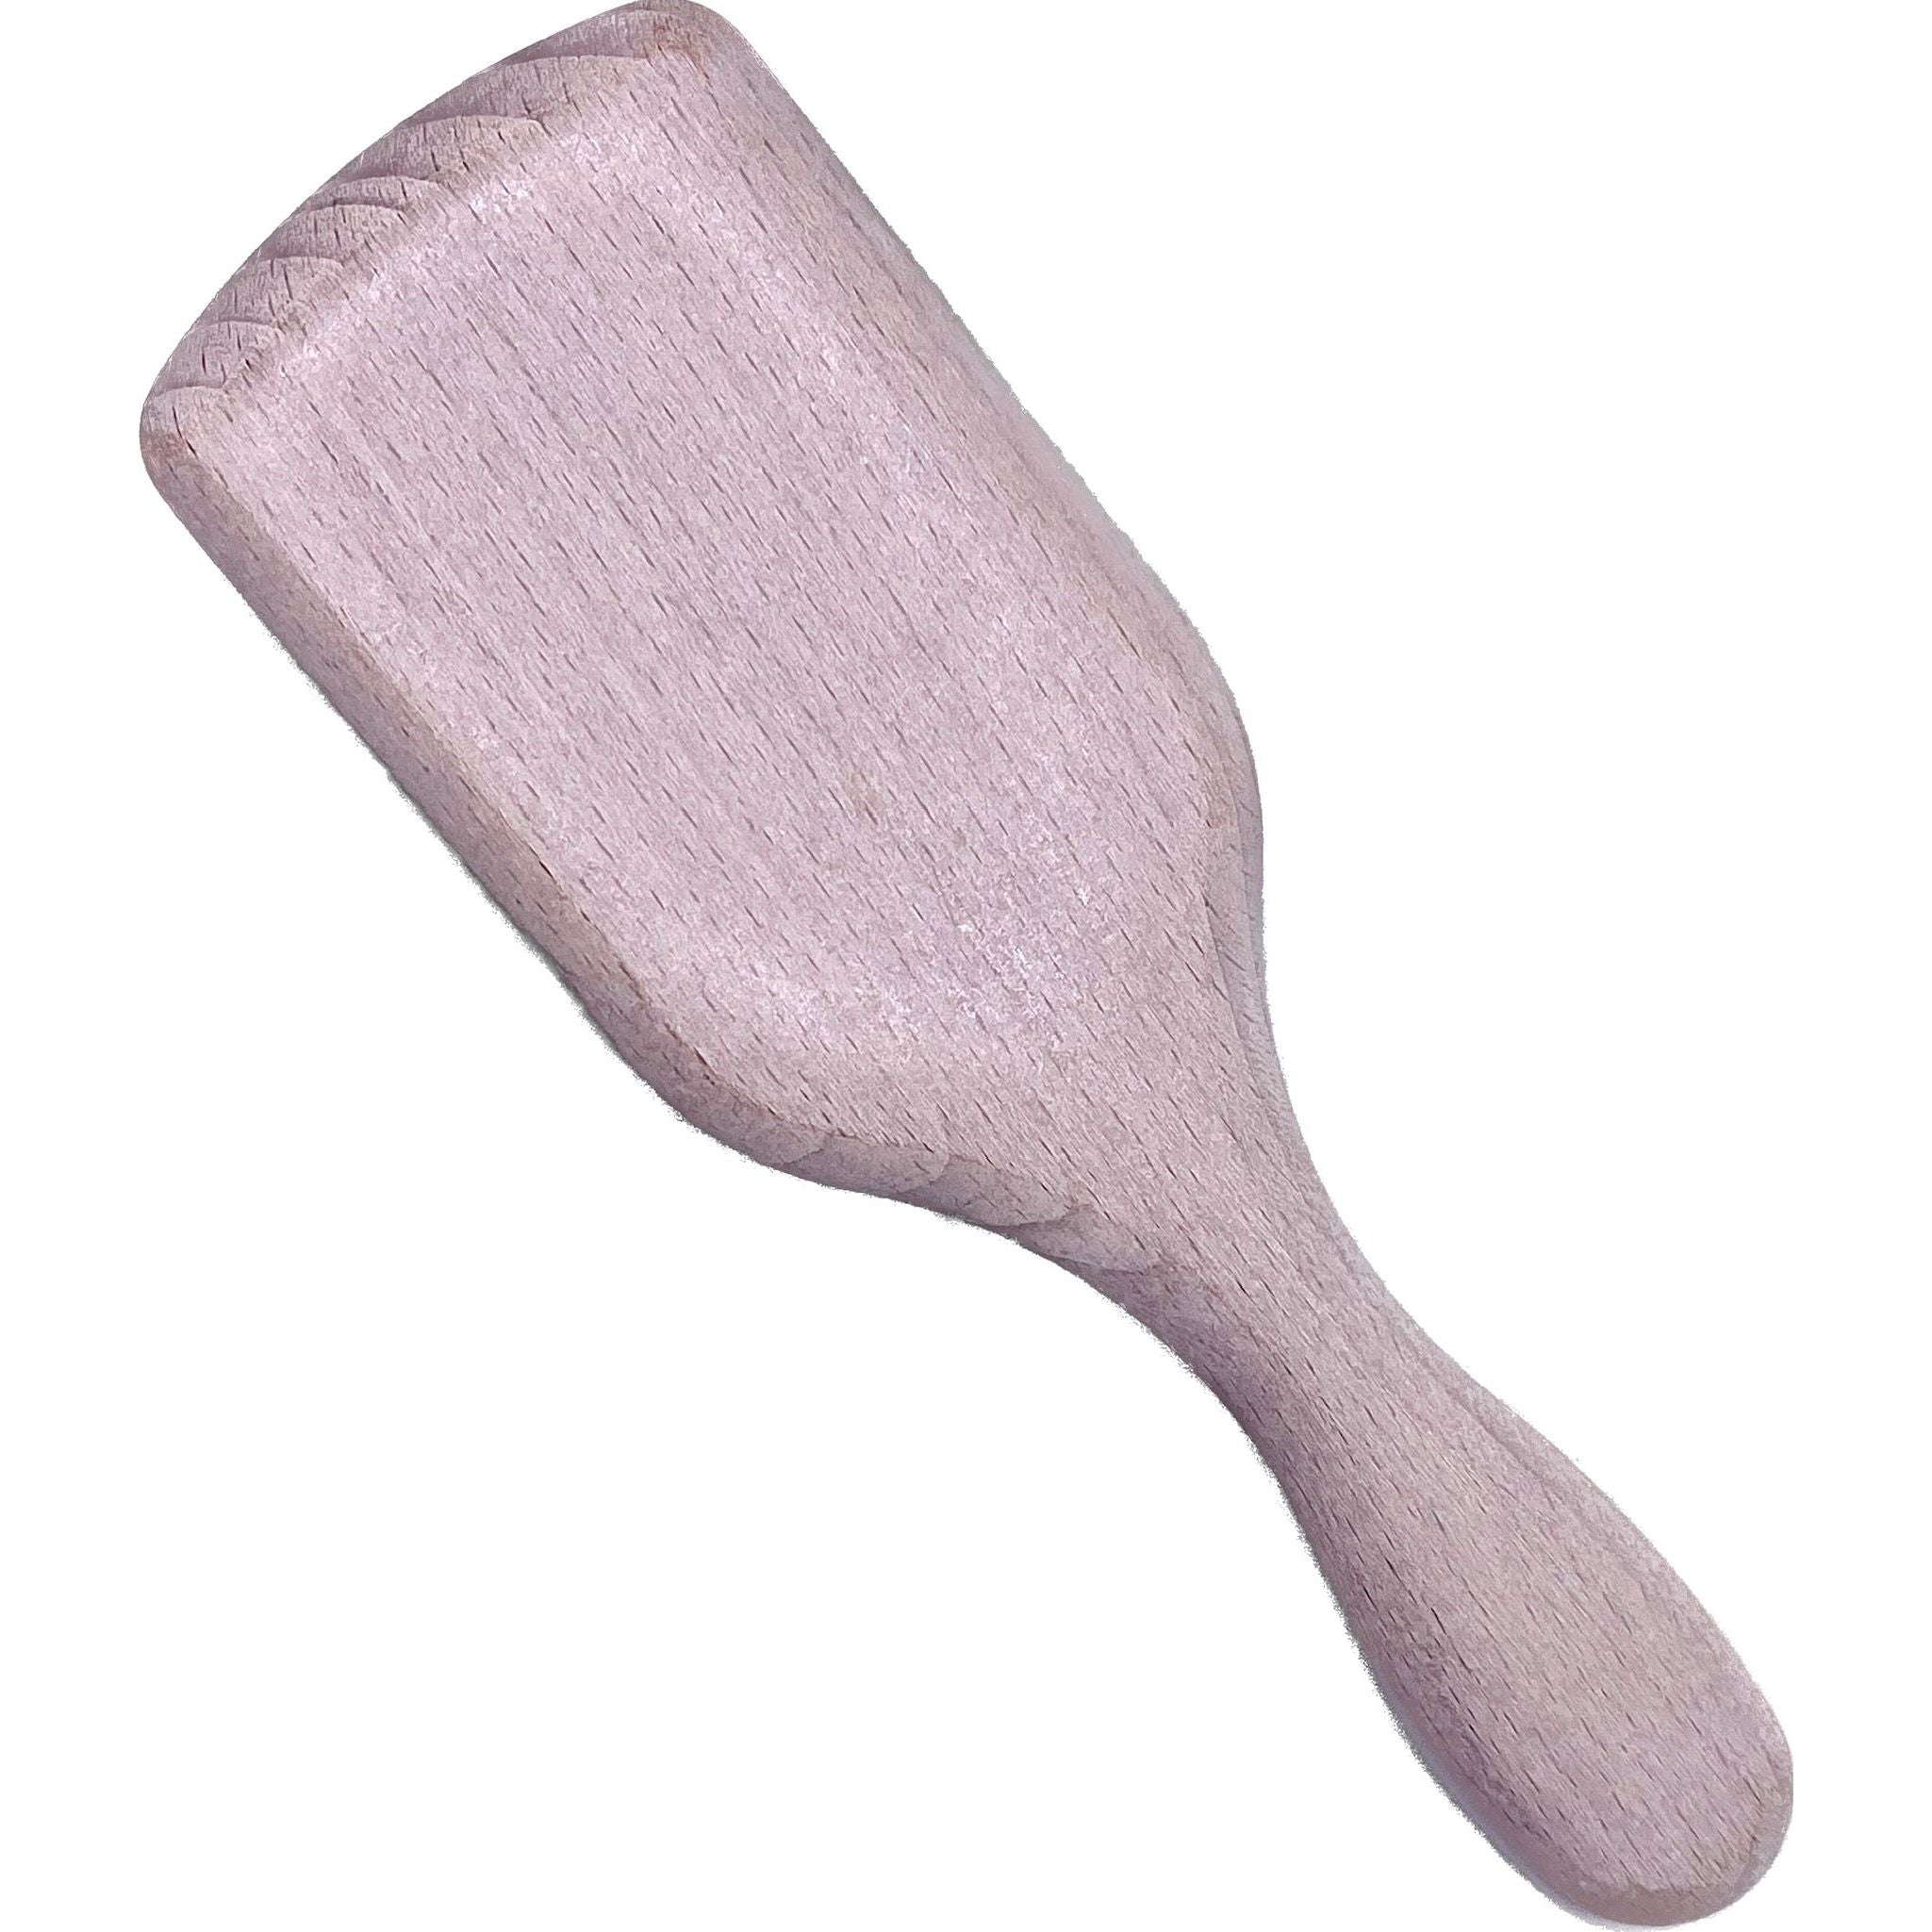 Dural Wooden Paddle Brush small Beech Wood Plastic pins with ball tips